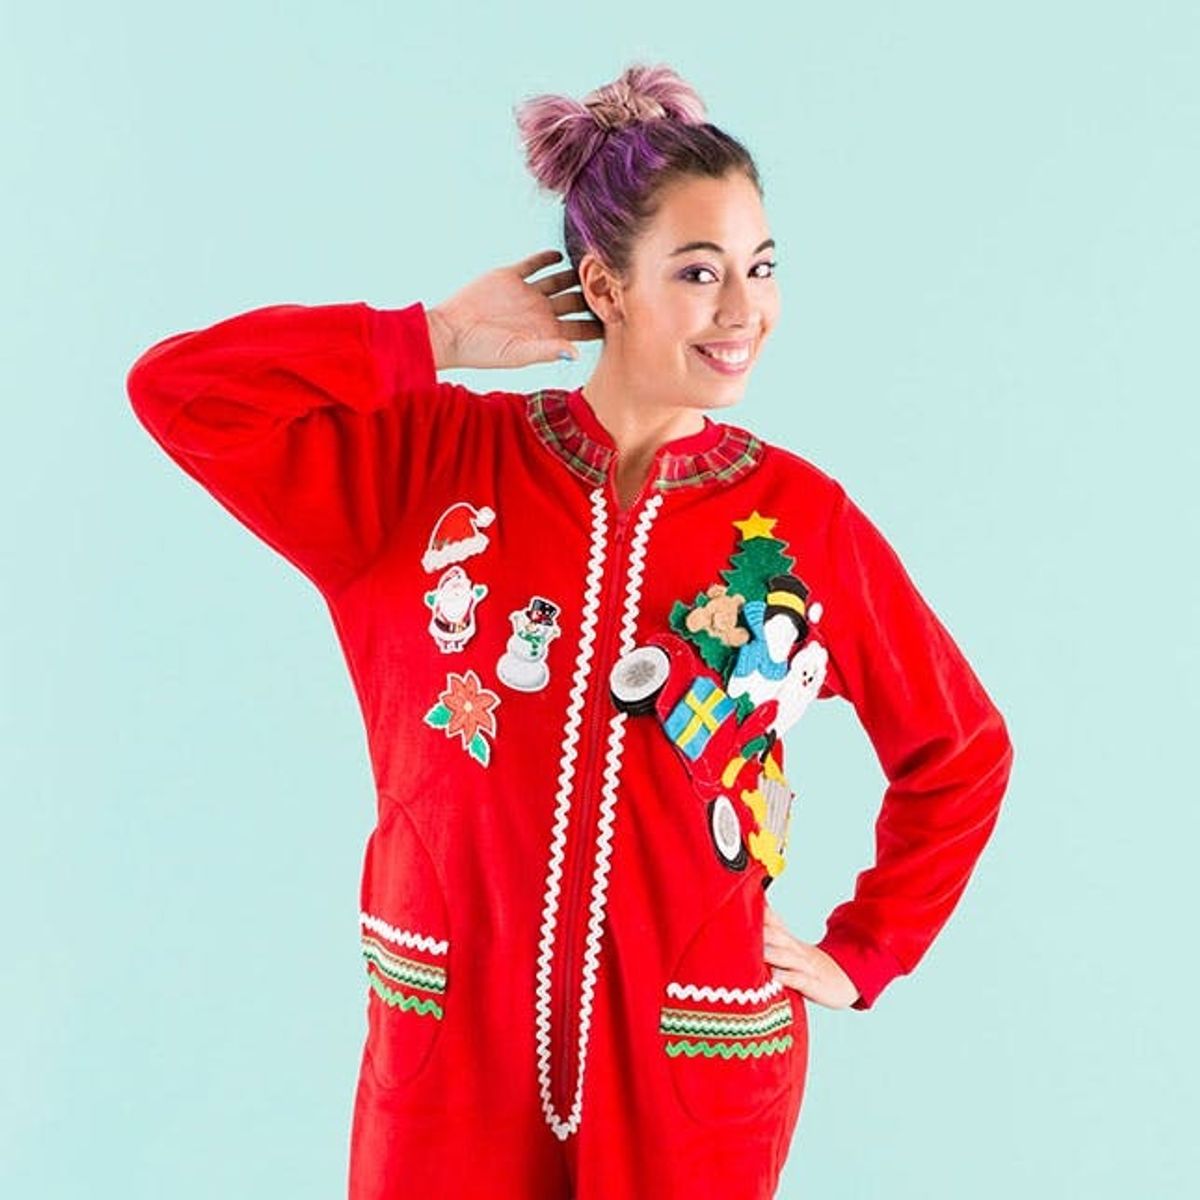 Get in on the Ugly Sweater Fun With an Adult Onesie